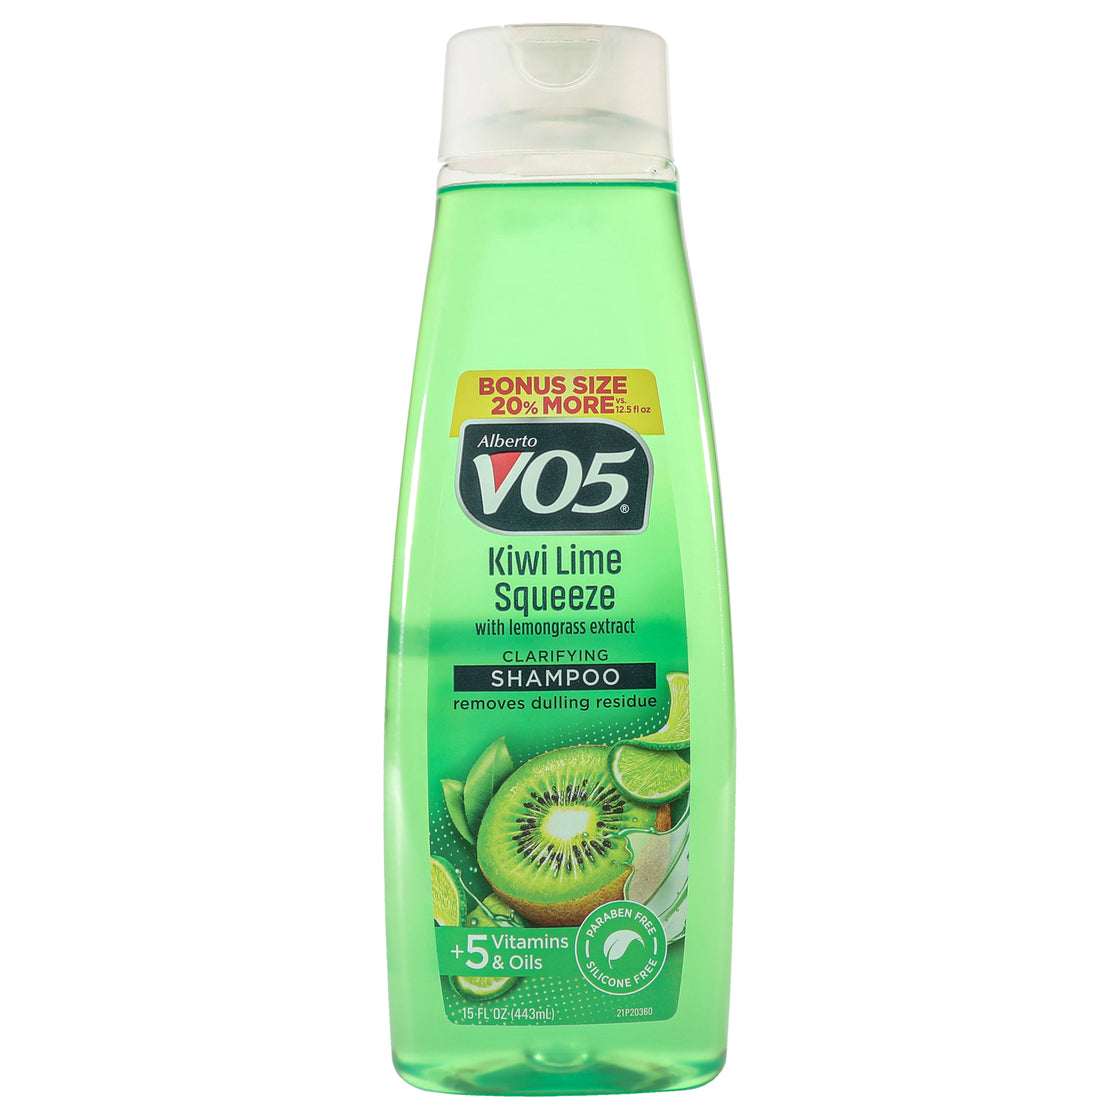 Herbal Escapes Kiwi Lime squeeze Clarifying Shampoo by Alberto VO5 for Unisex - 15 oz Shampoo